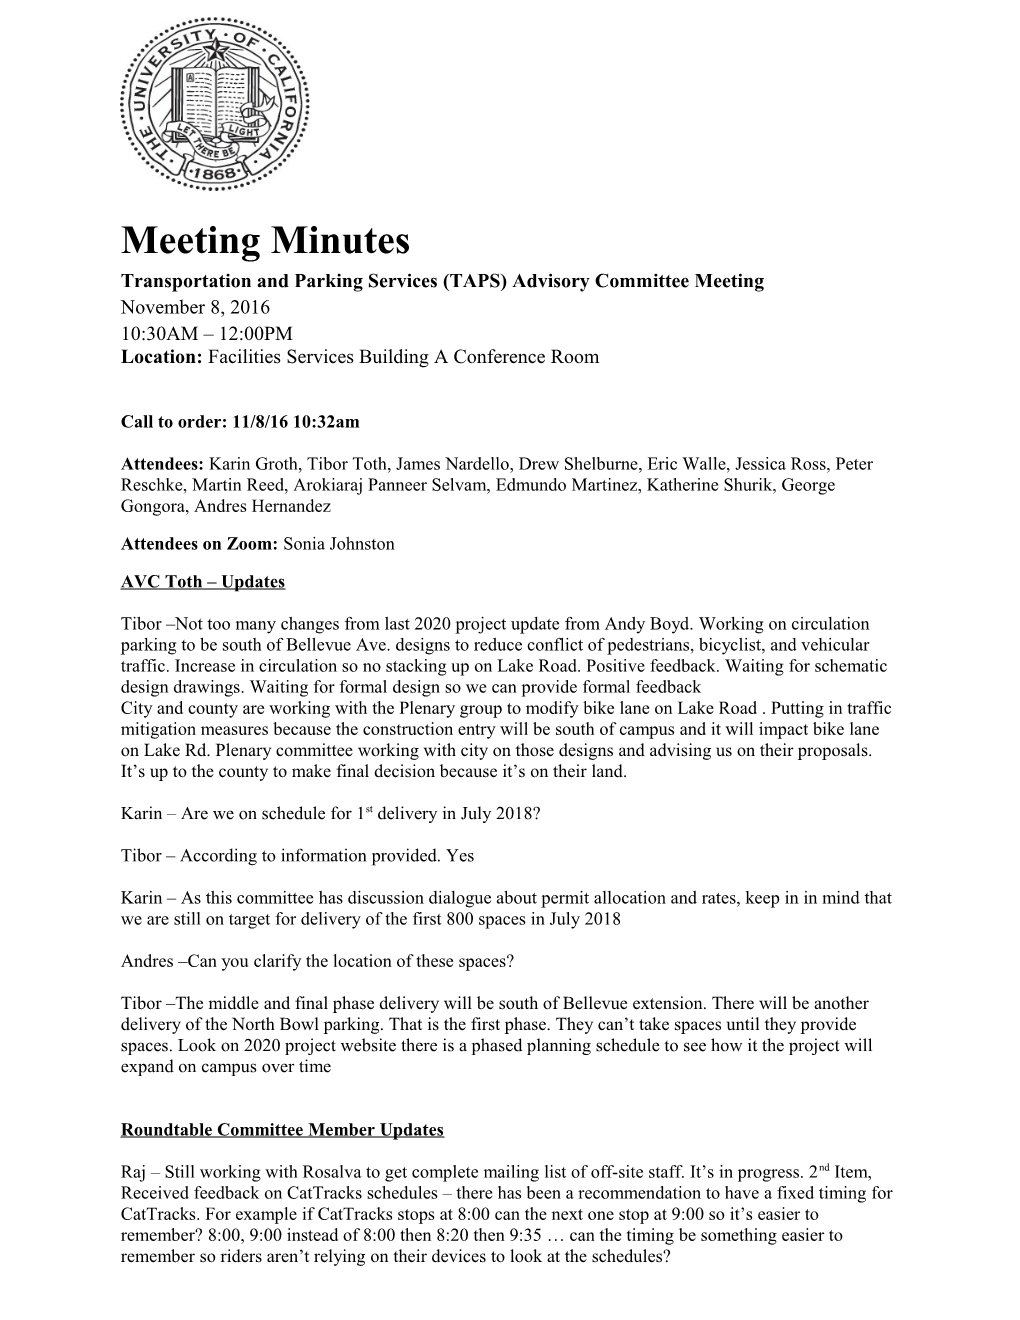 Transportation and Parking Services (TAPS) Advisory Committee Meeting